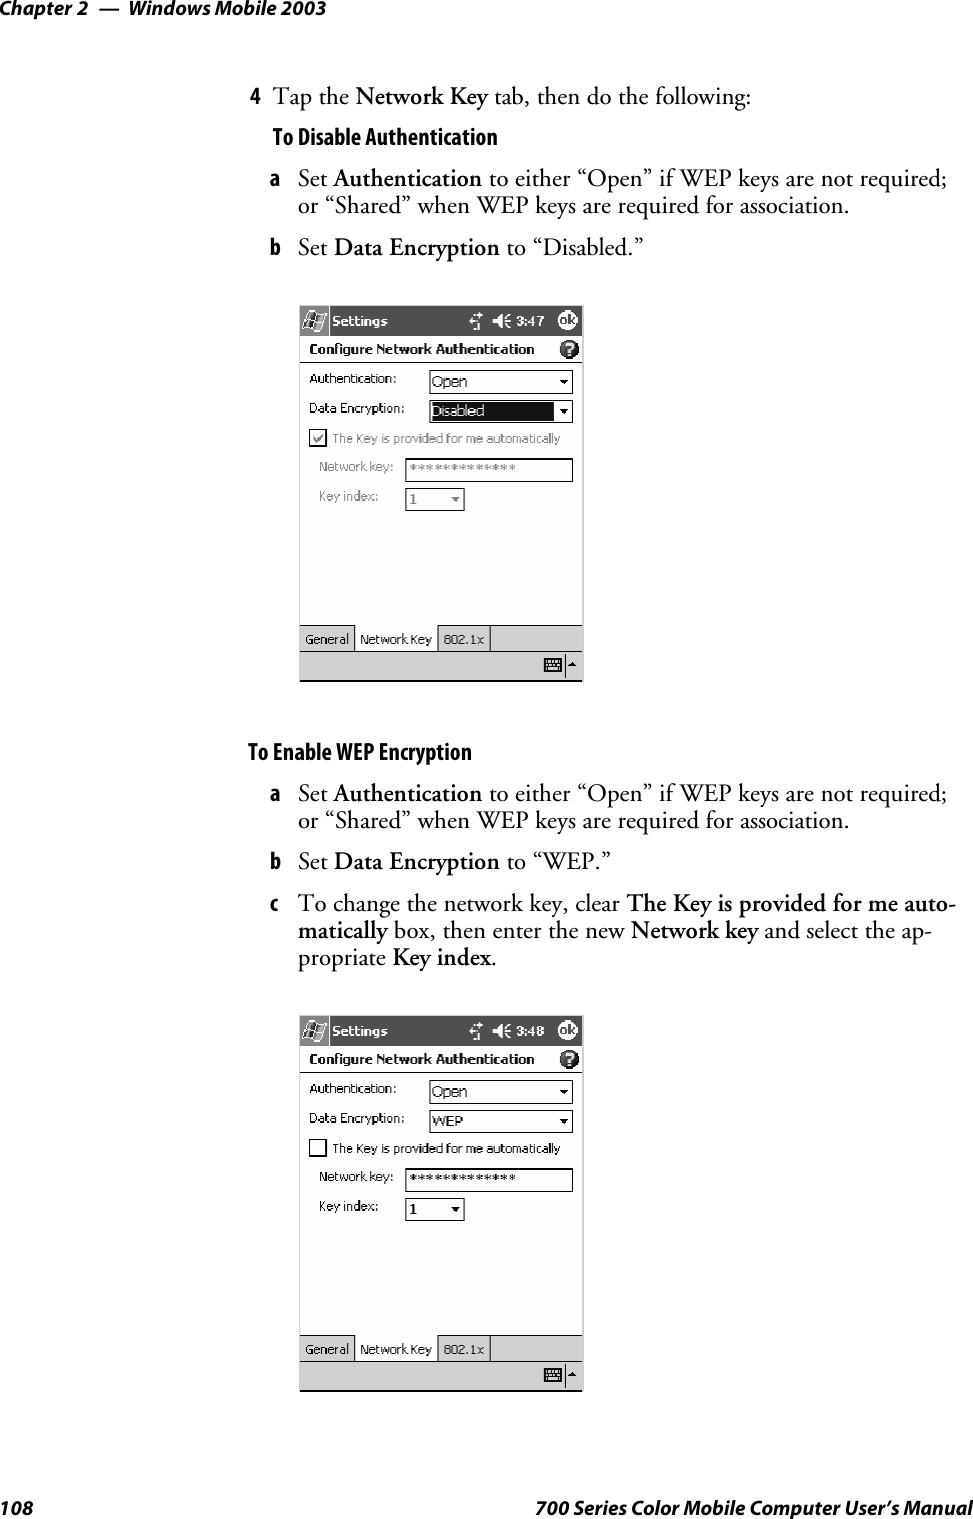 Windows Mobile 2003Chapter —2108 700 Series Color Mobile Computer User’s Manual4Tap the Network Key tab, then do the following:To Disable AuthenticationaSet Authentication to either “Open” if WEP keys are not required;or “Shared” when WEP keys are required for association.bSet Data Encryption to “Disabled.”To Enable WEP EncryptionaSet Authentication to either “Open” if WEP keys are not required;or “Shared” when WEP keys are required for association.bSet Data Encryption to “WEP.”cTo change the network key, clear The Key is provided for me auto-matically box, then enter the new Network key and select the ap-propriate Key index.